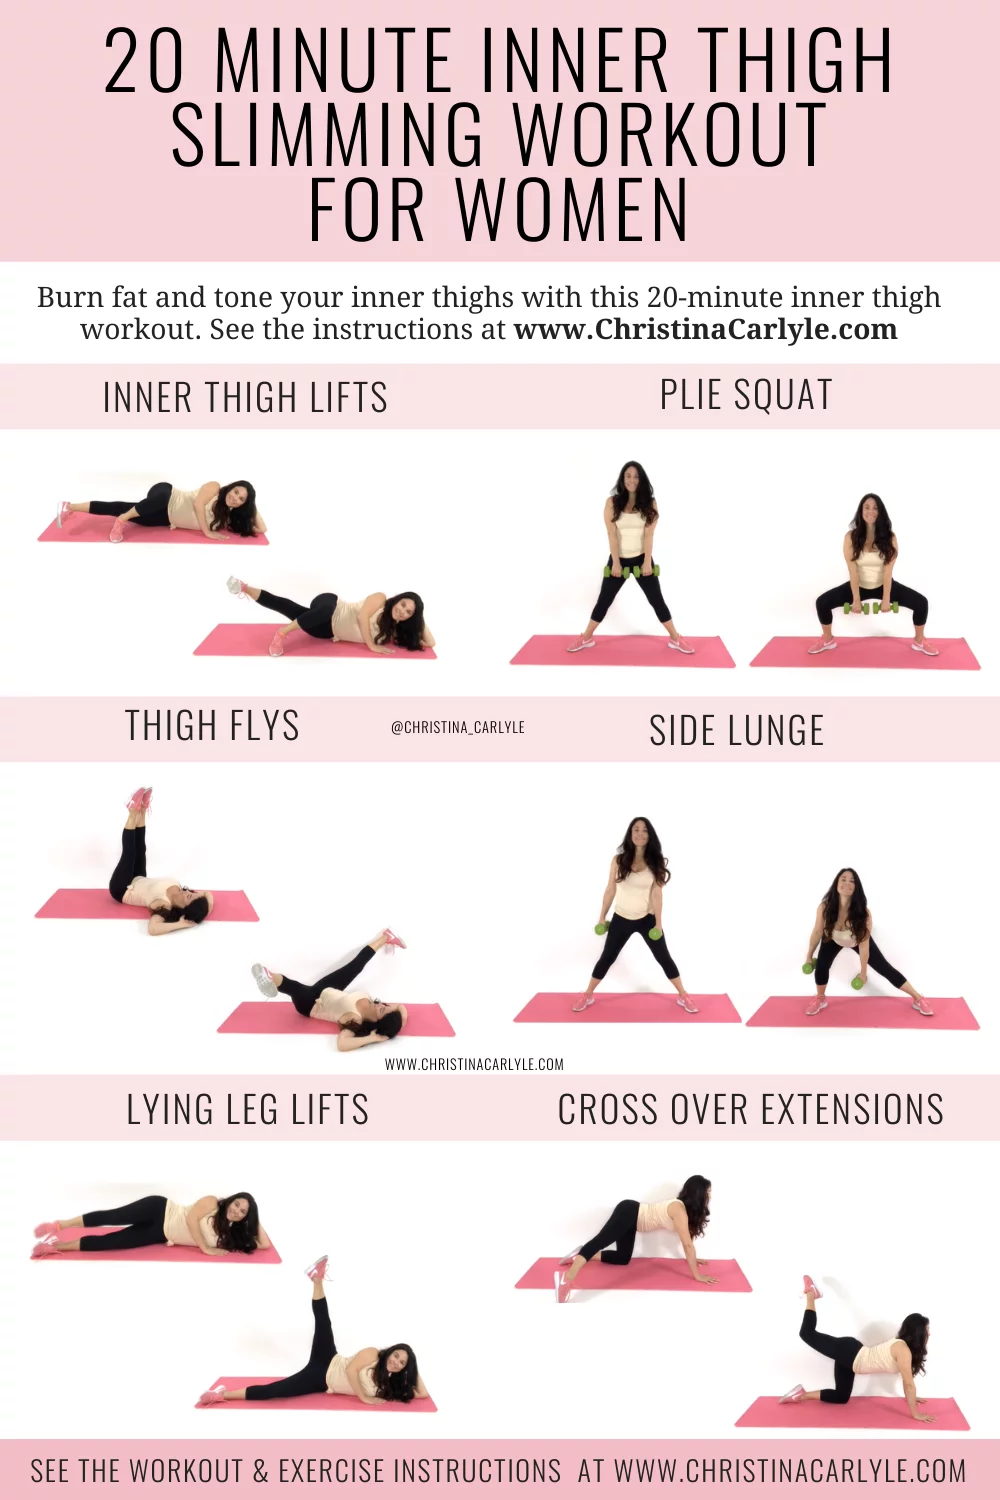 20 Minute Inner Thigh Slim Down Workout for Tight, Toned Thighs